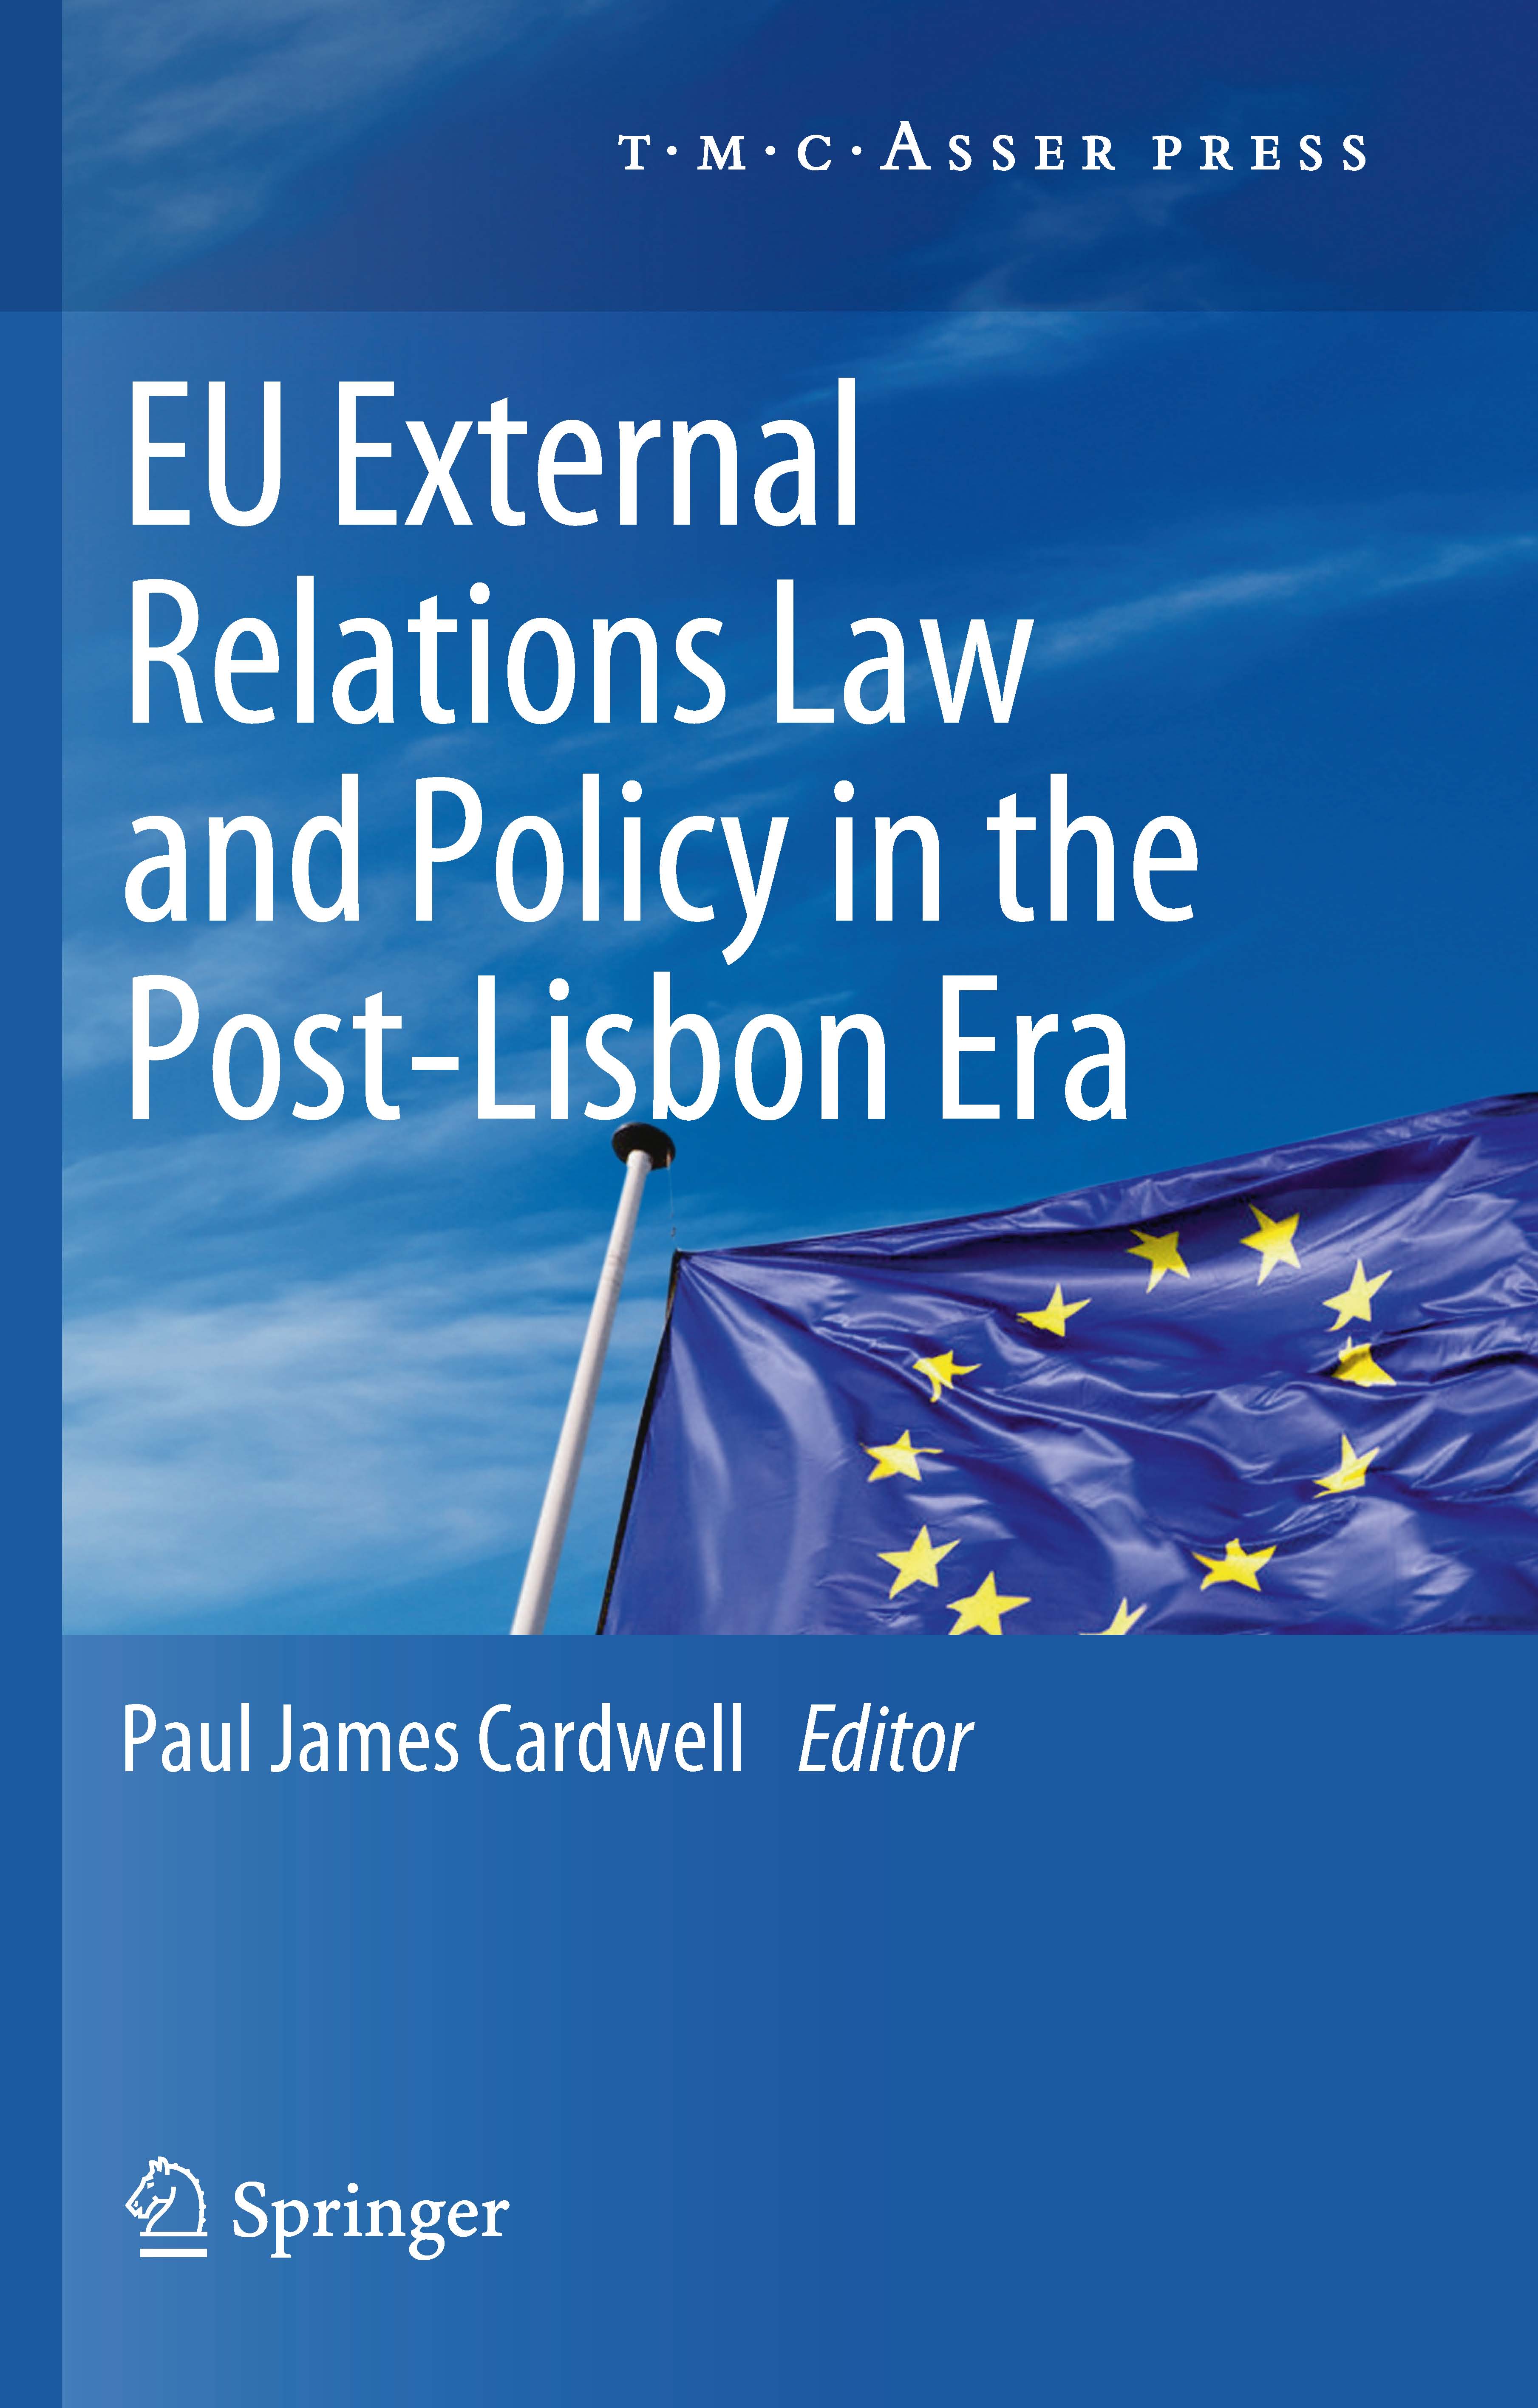 EU External Relations - Law and Policy in the Post-Lisbon Era